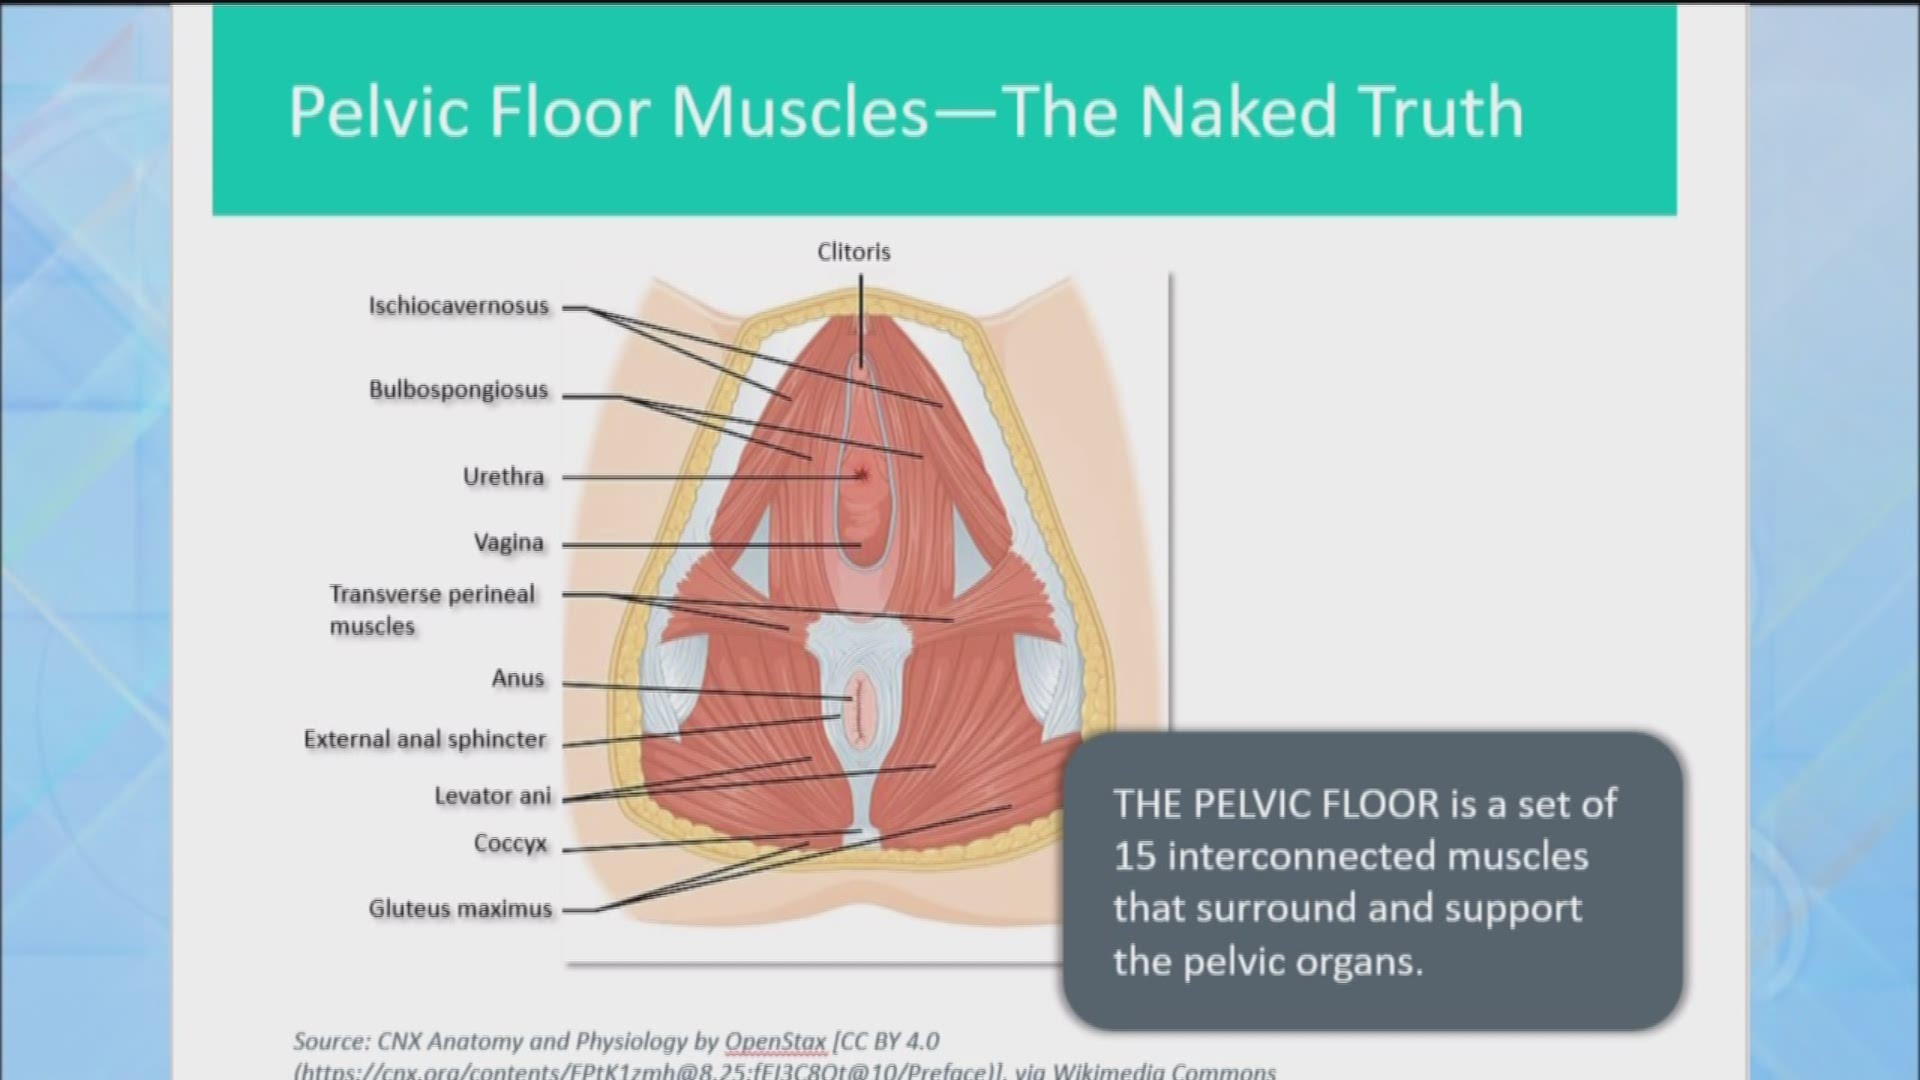 Pelvic health can be a hard issue to discuss for women, but crucial.